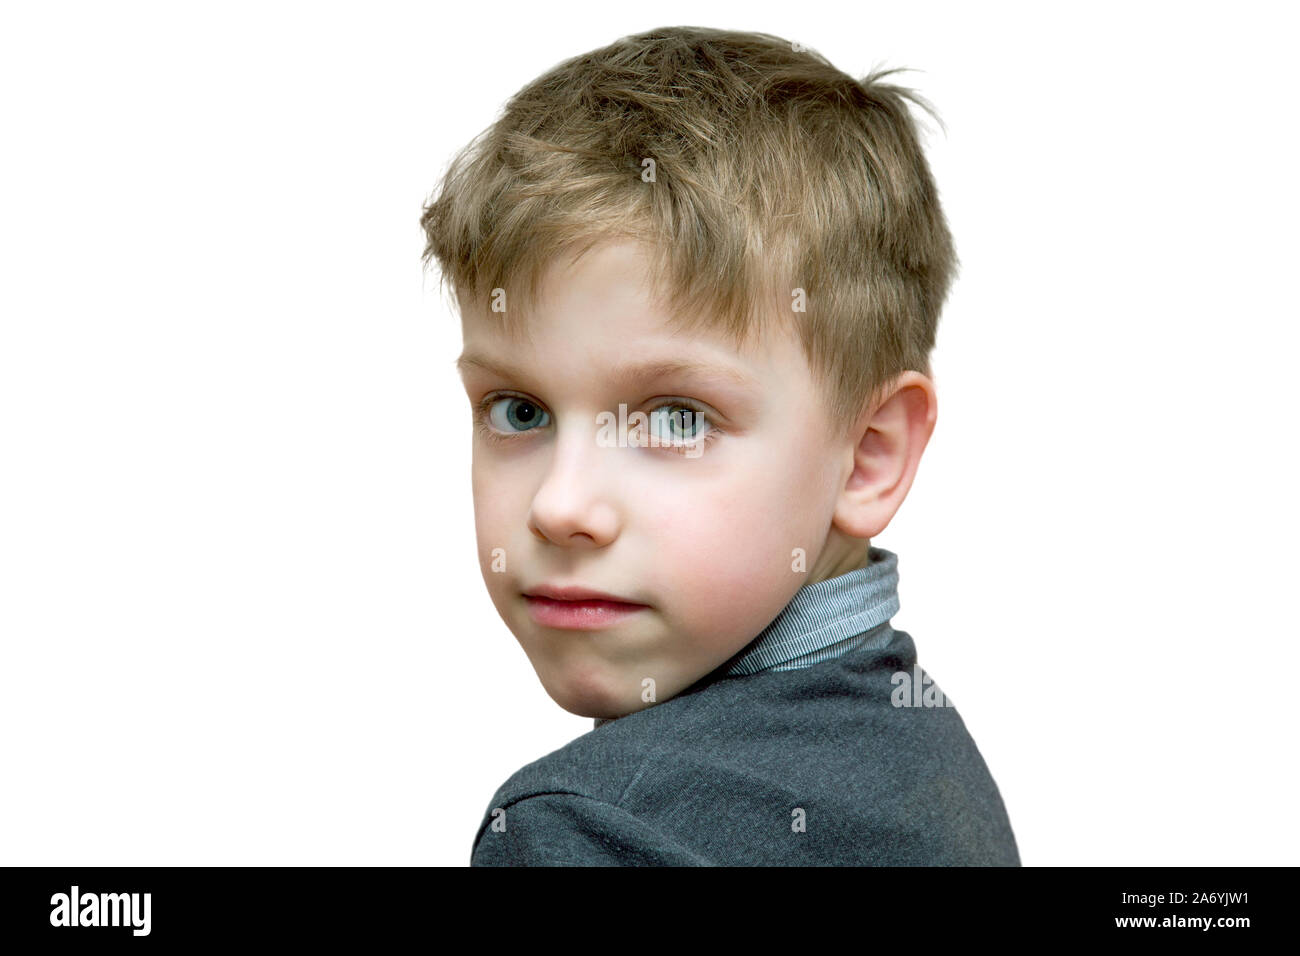 the boy looks half-turned right into the camera on a white background Stock Photo